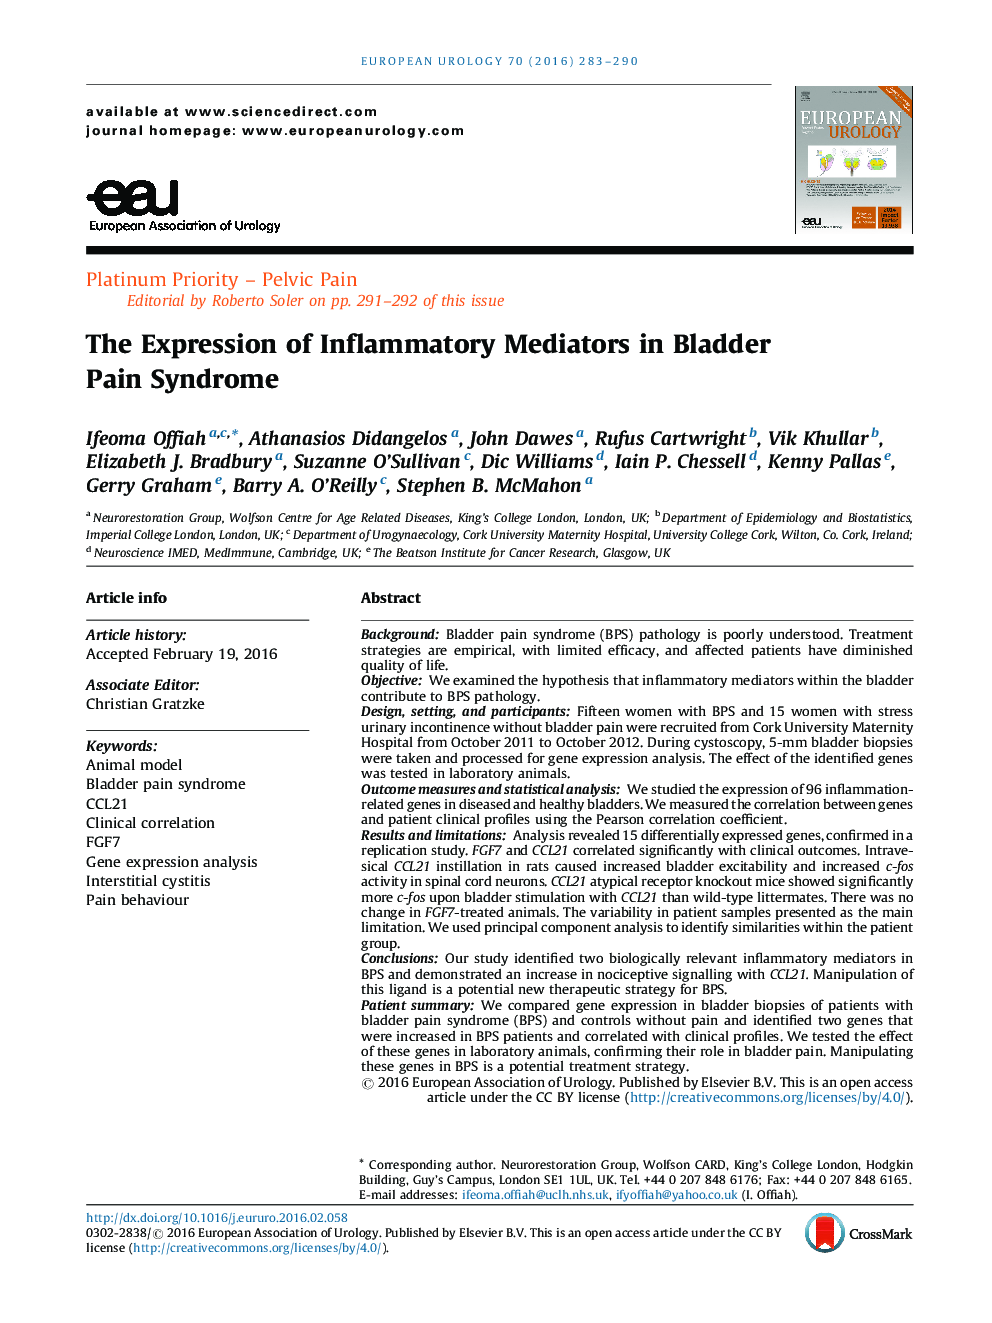 The Expression of Inflammatory Mediators in Bladder Pain Syndrome